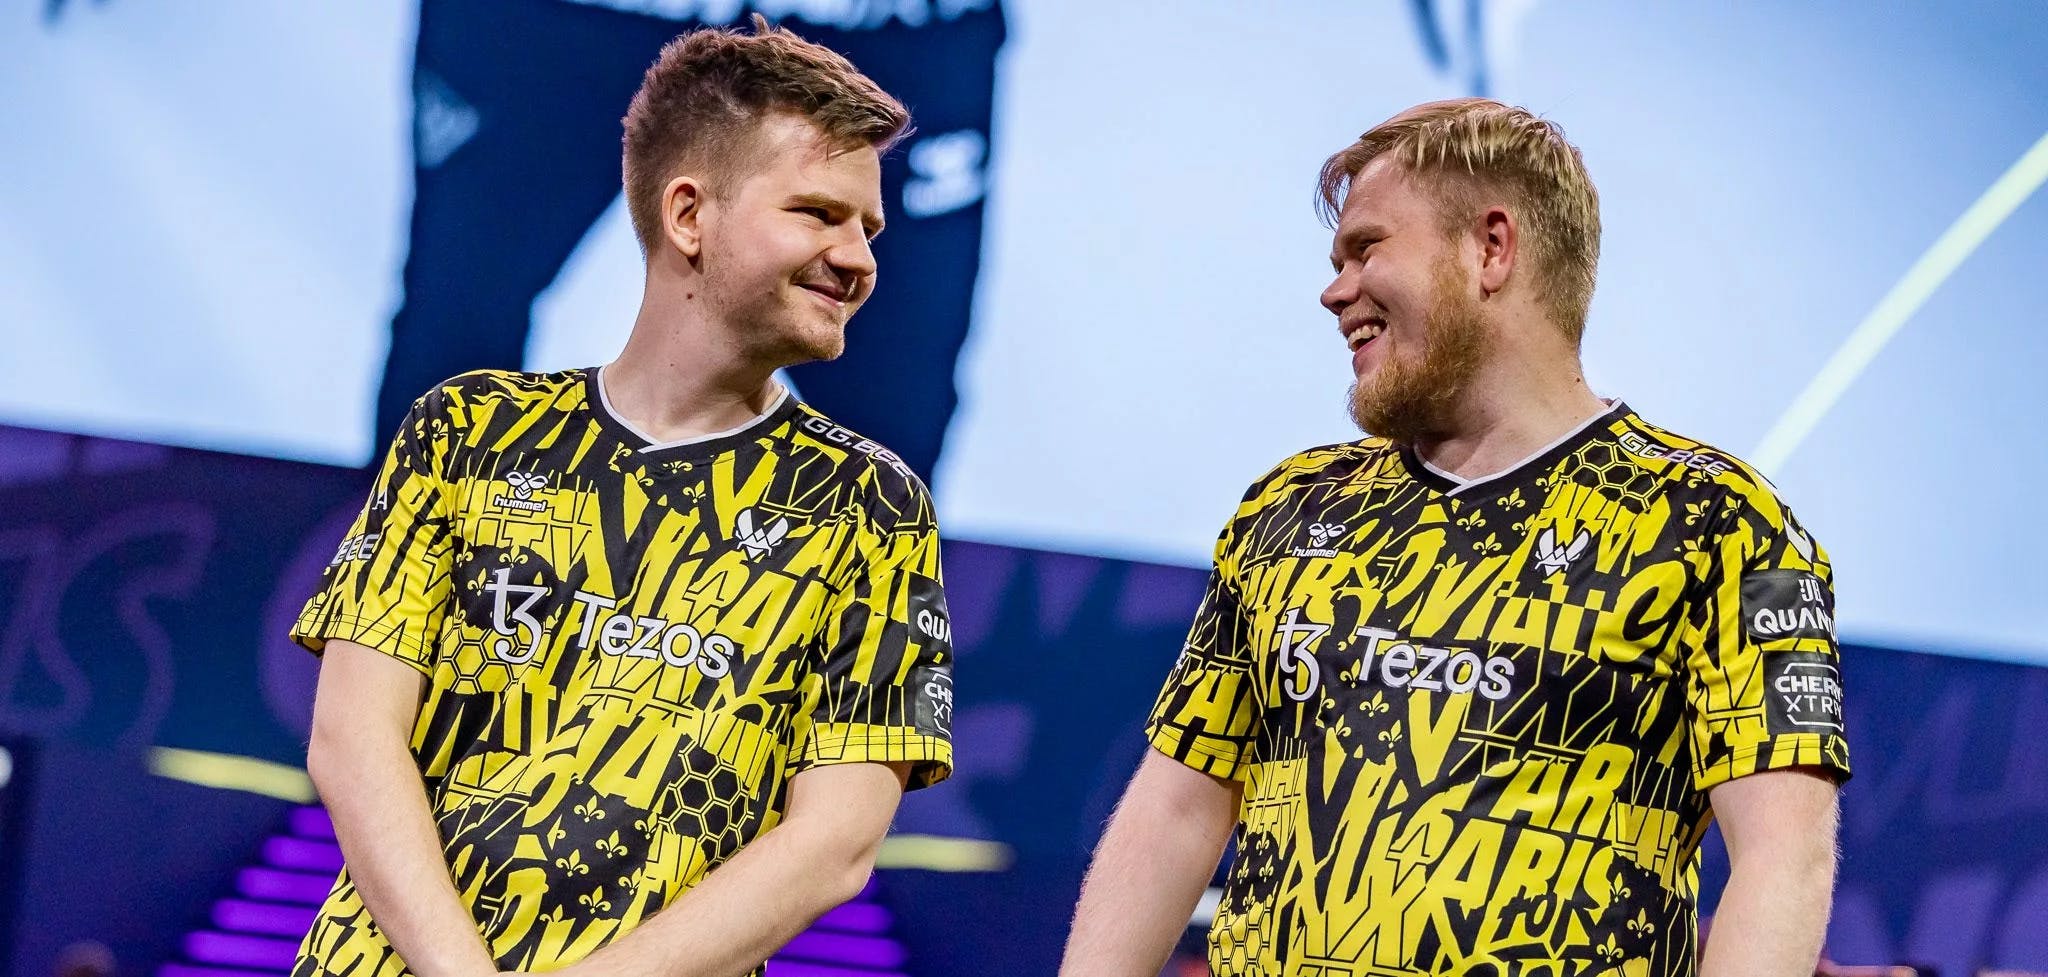 dupreeh Joins Falcons, Reuniting with Former Teammates